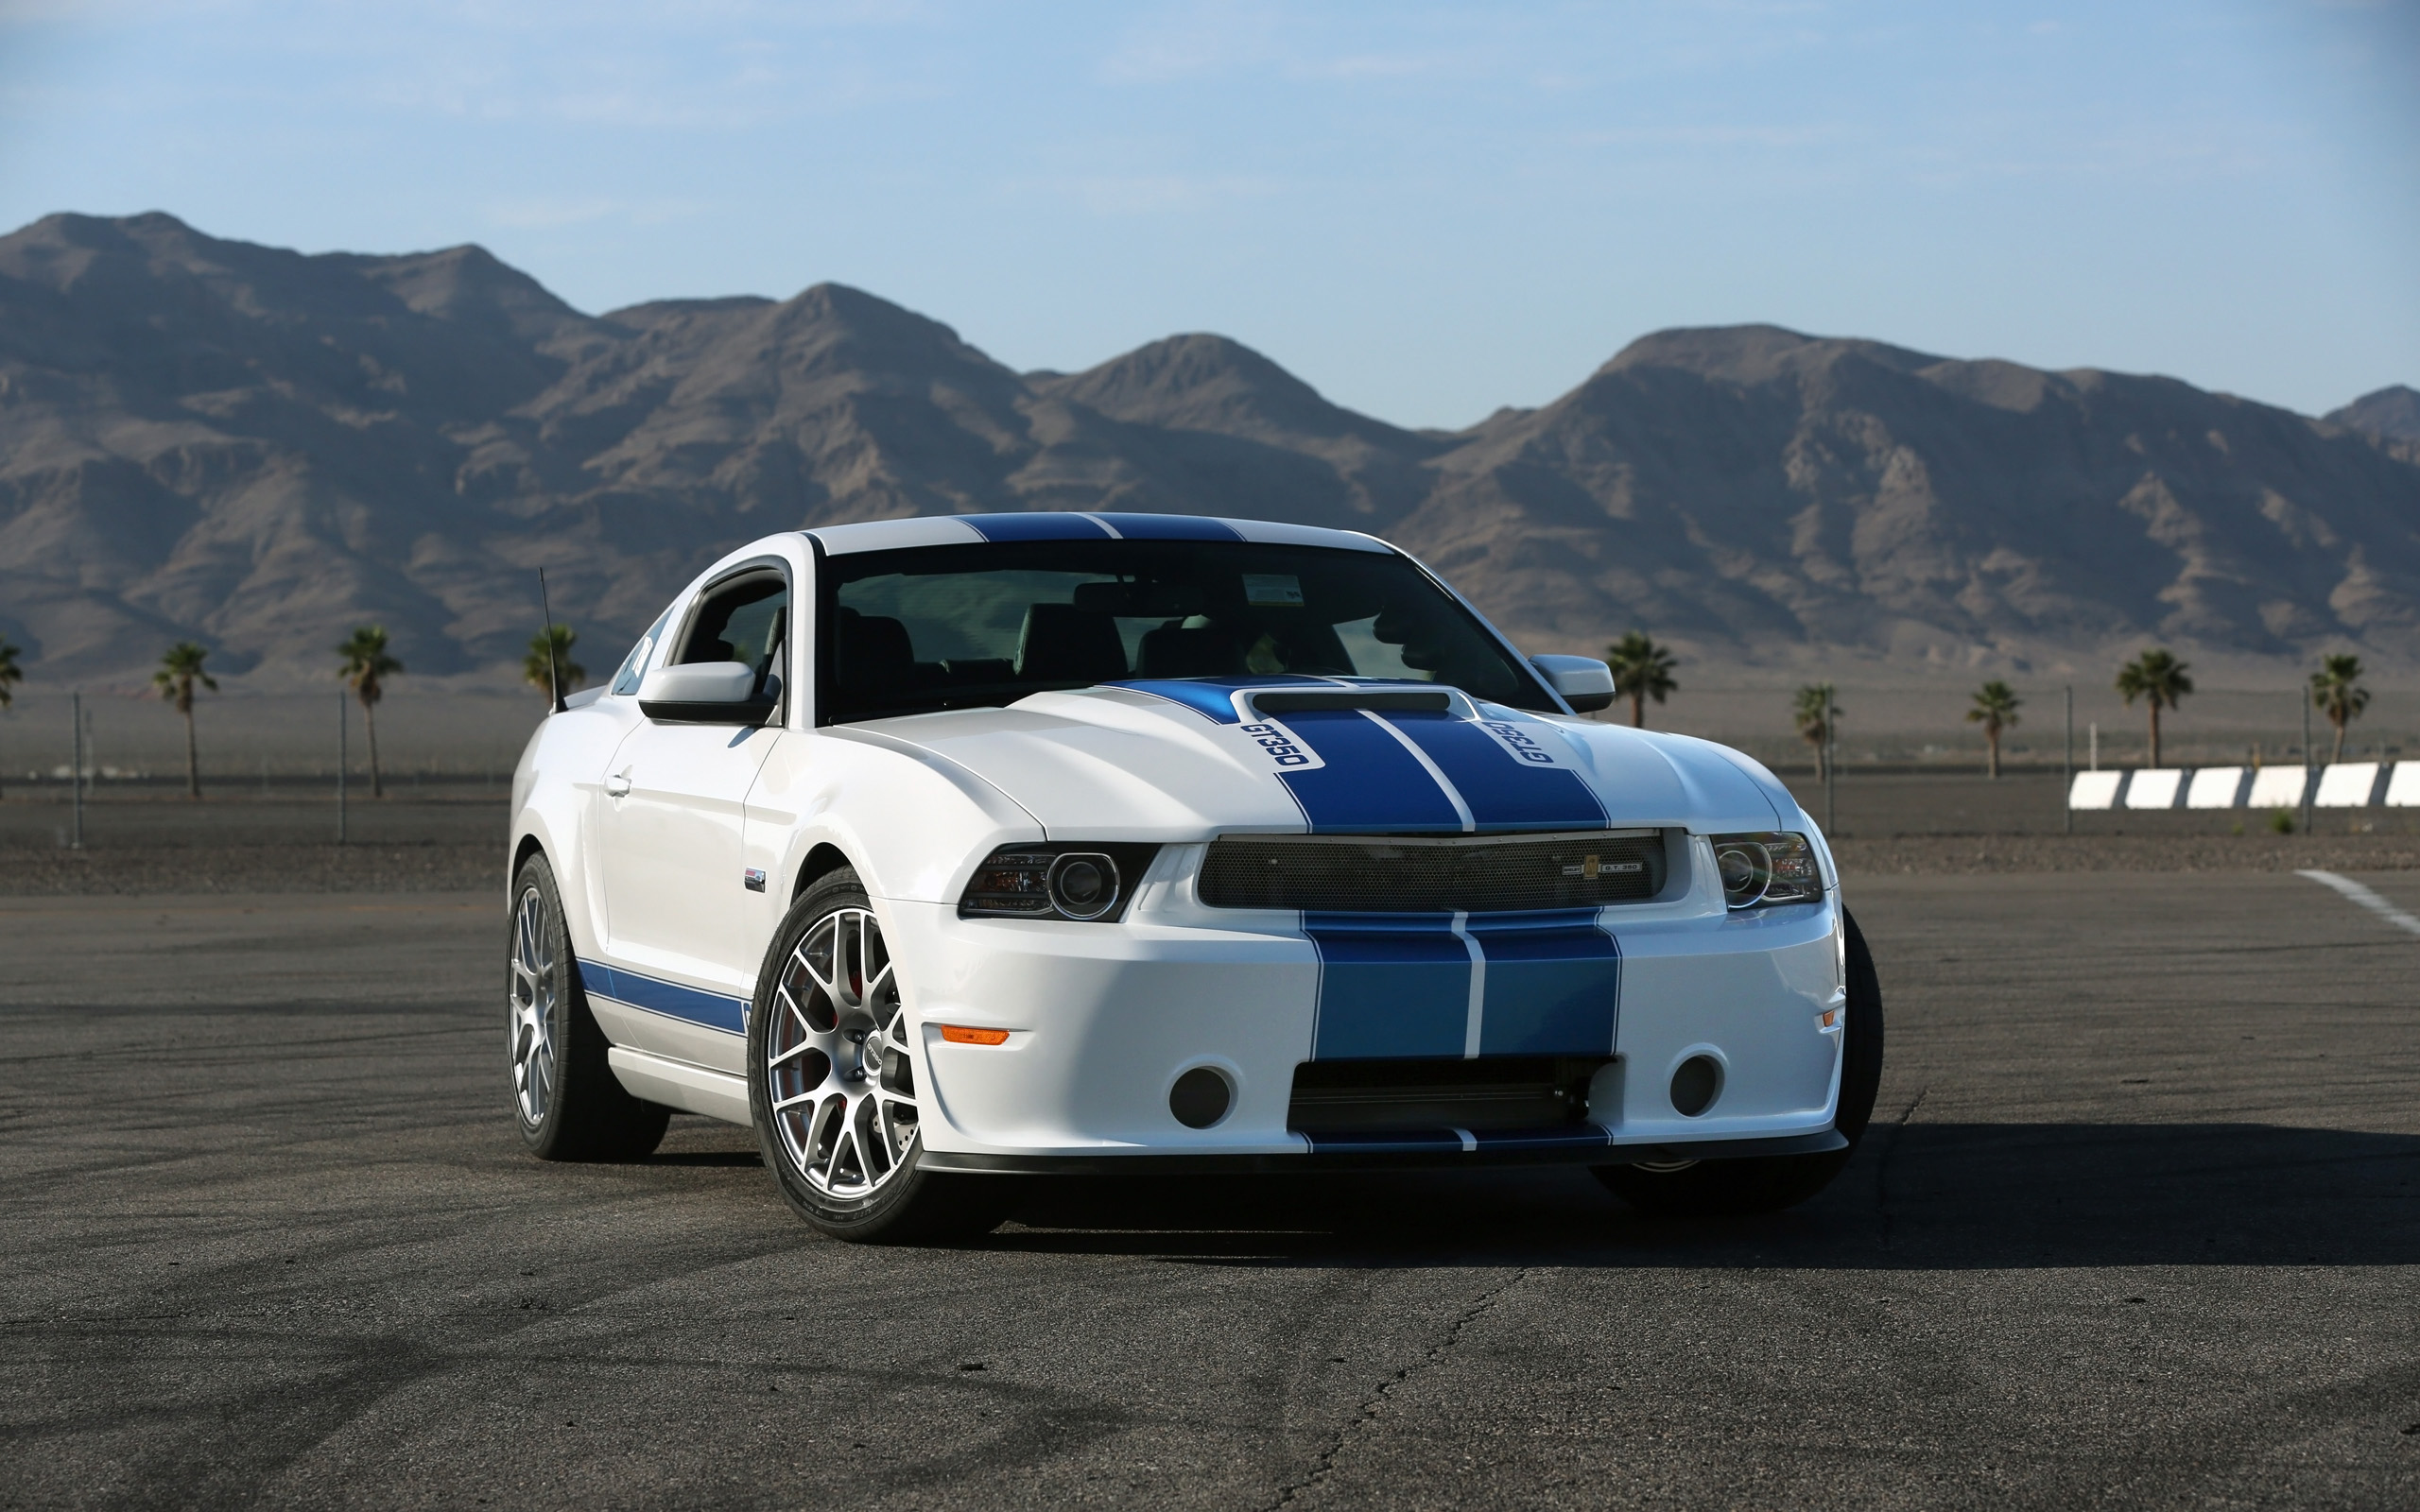 2013, Shelby, Gt350, Ford, Mustang, Supercar, Musle Wallpaper